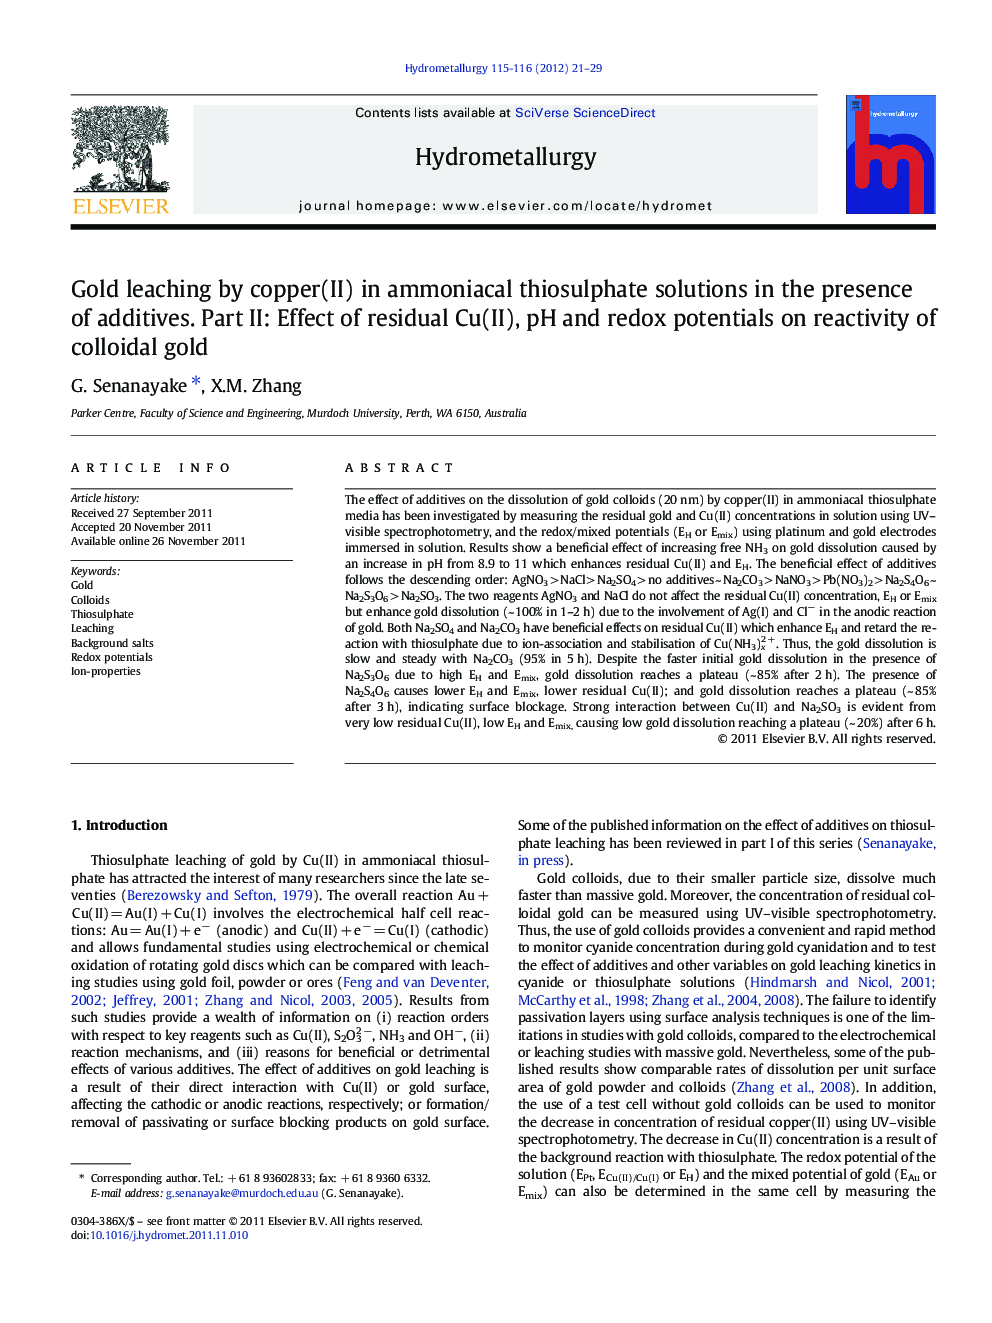 Gold leaching by copper(II) in ammoniacal thiosulphate solutions in the presence of additives. Part II: Effect of residual Cu(II), pH and redox potentials on reactivity of colloidal gold